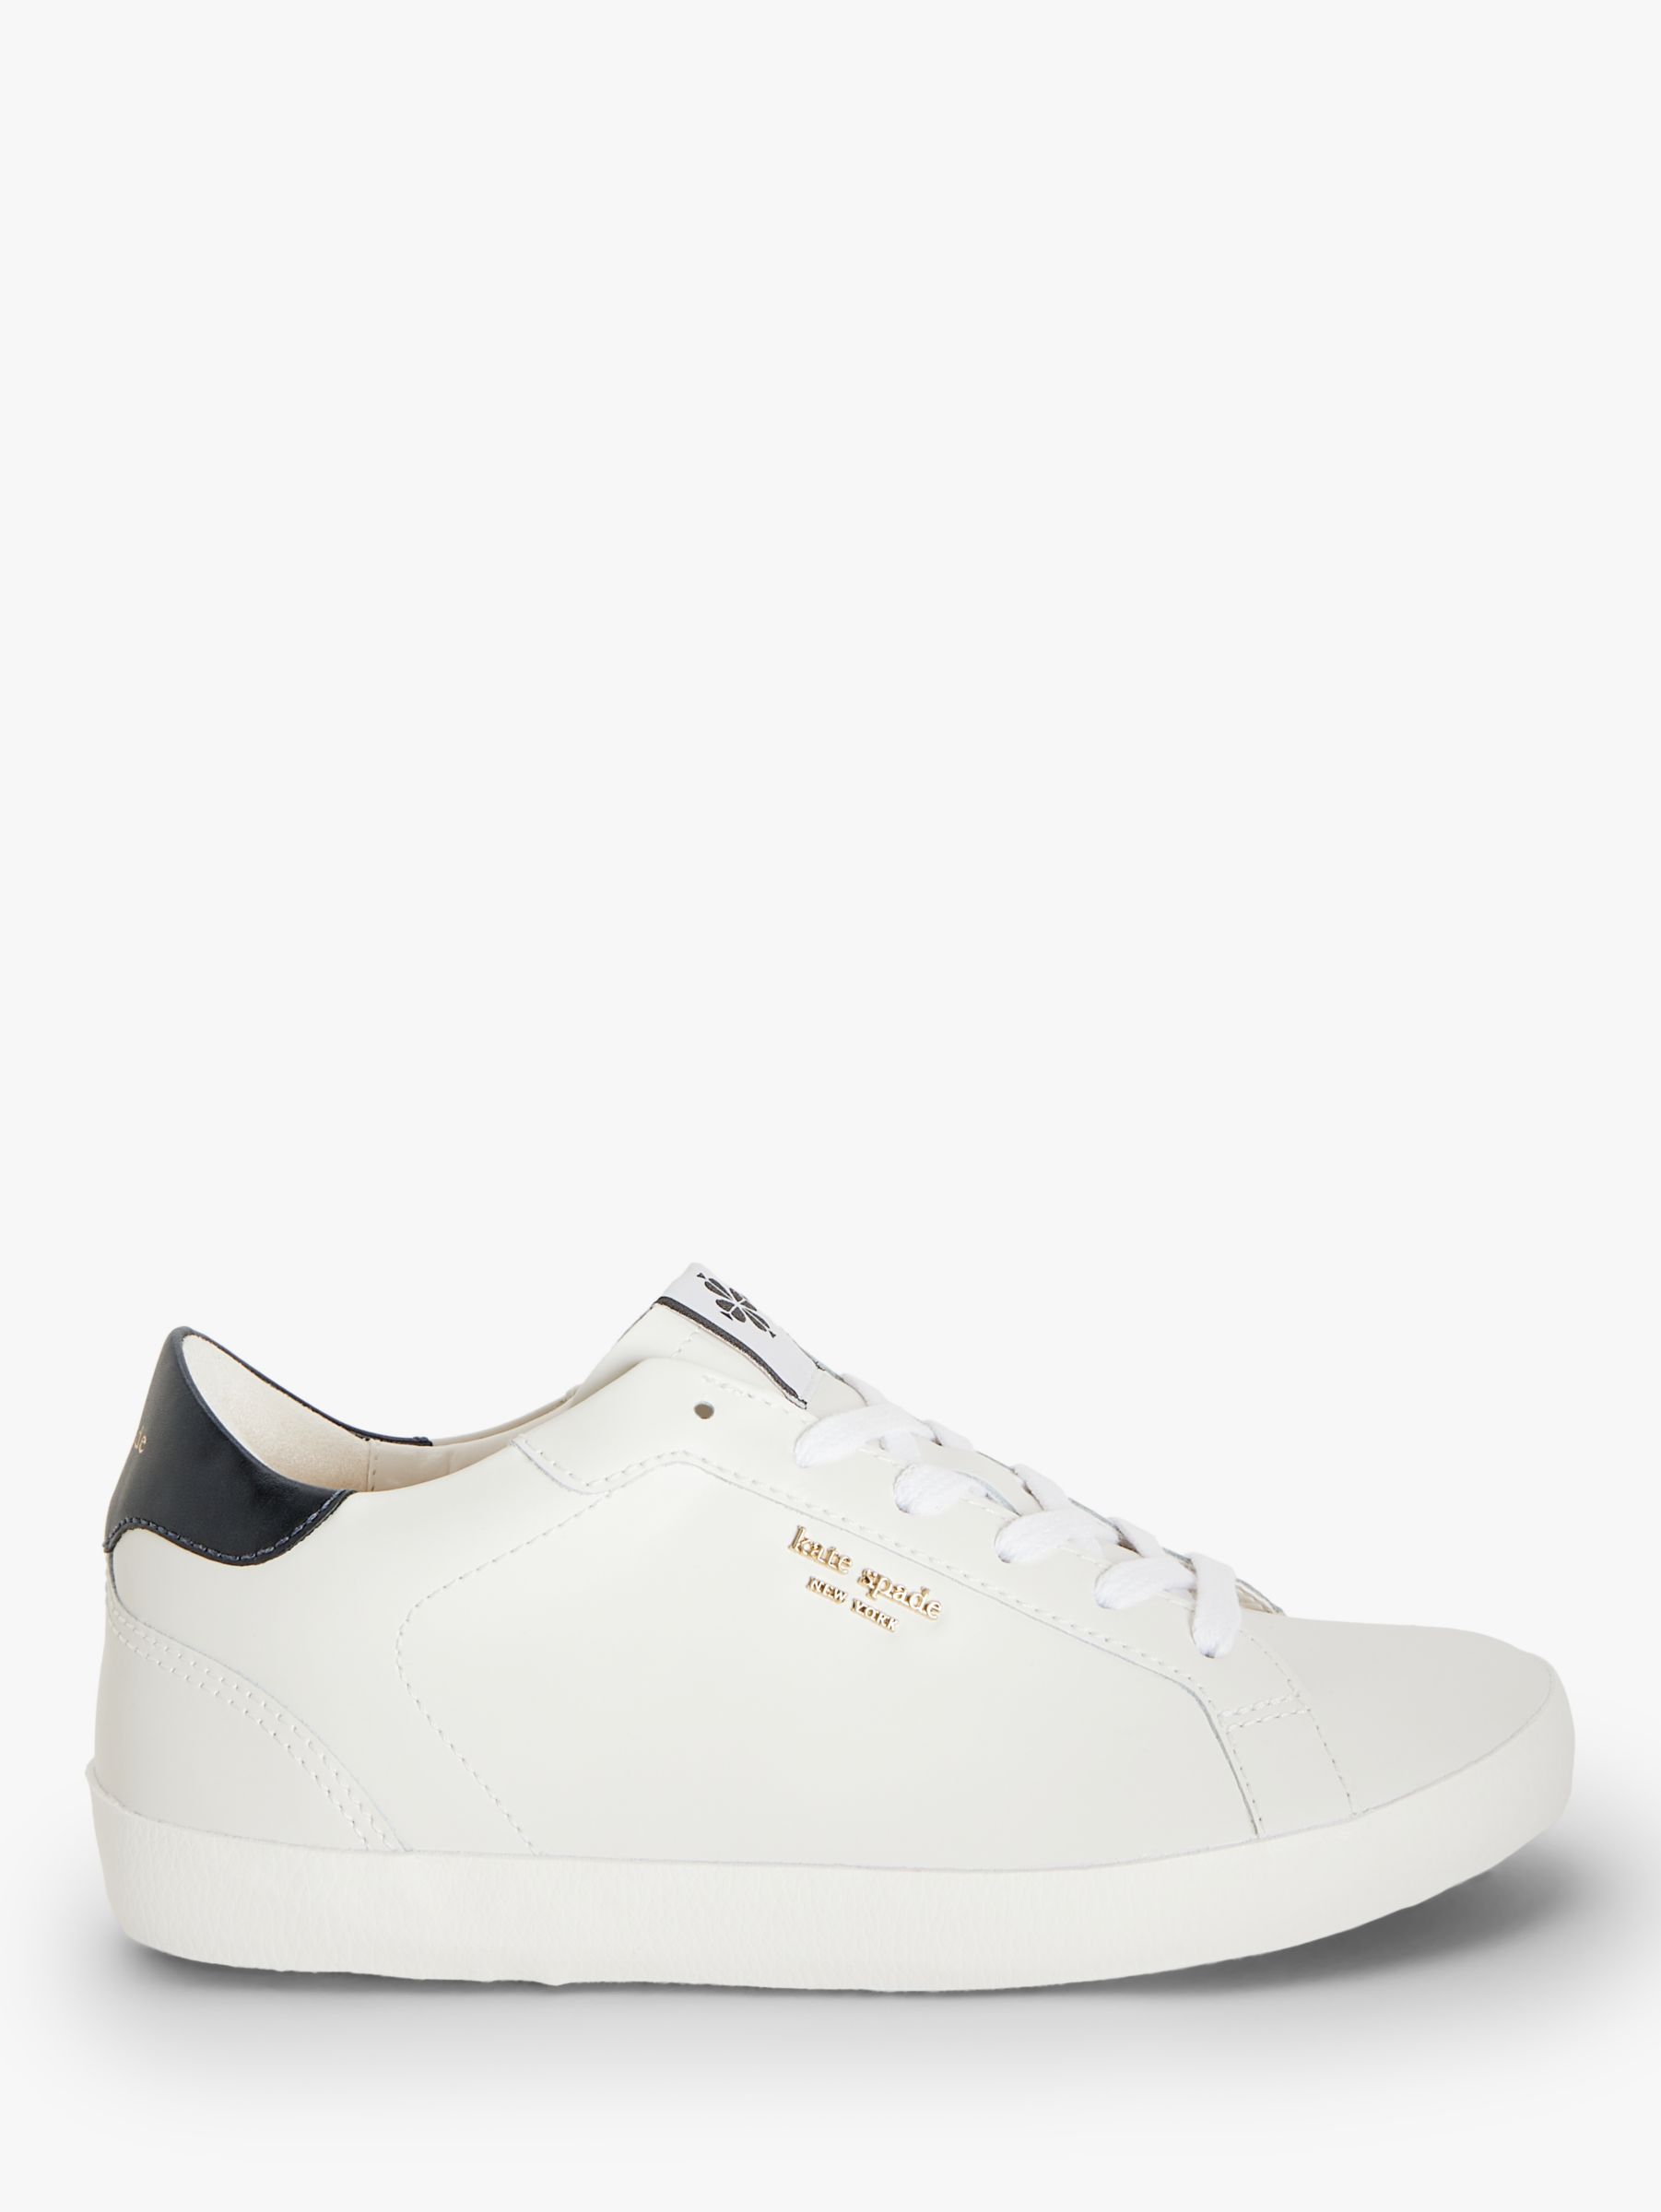 kate spade new york Ace Low Top Leather Trainers, Optic White/Black